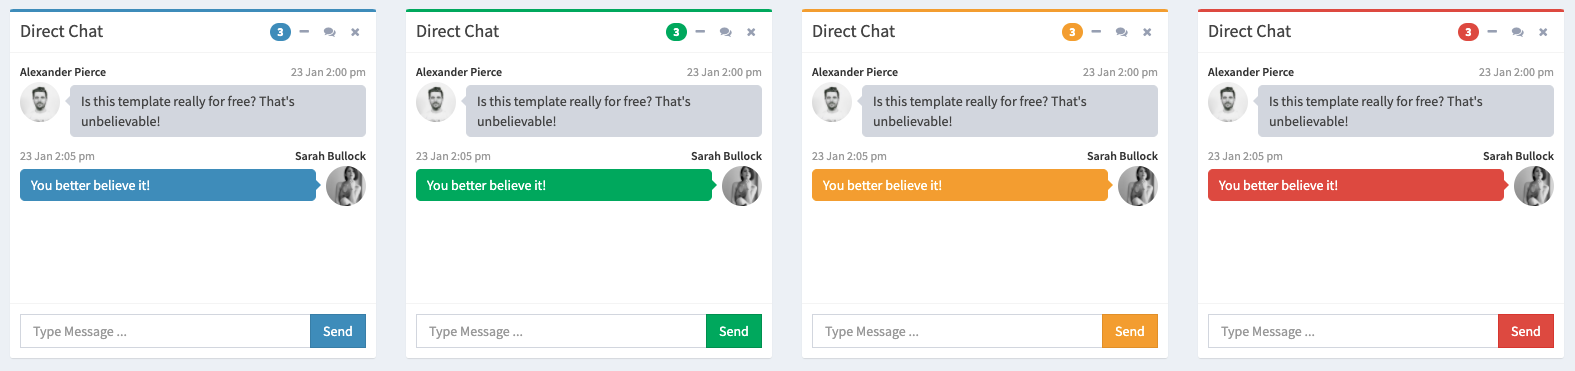 Chat user interface for AdminLTE2.